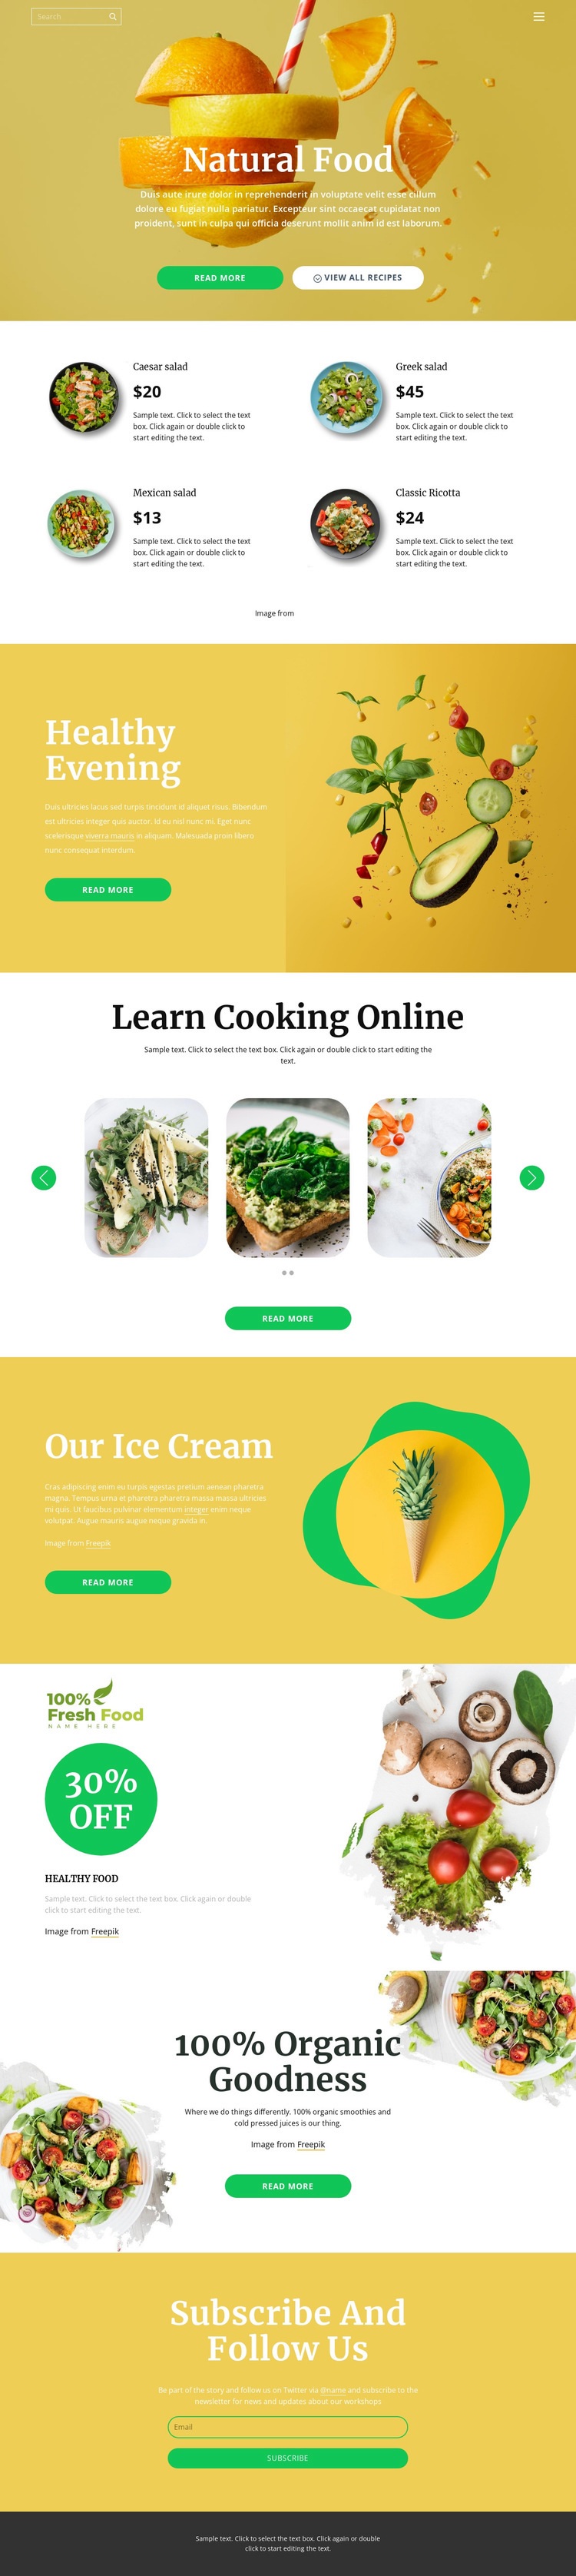 Delicious and healthy food Homepage Design